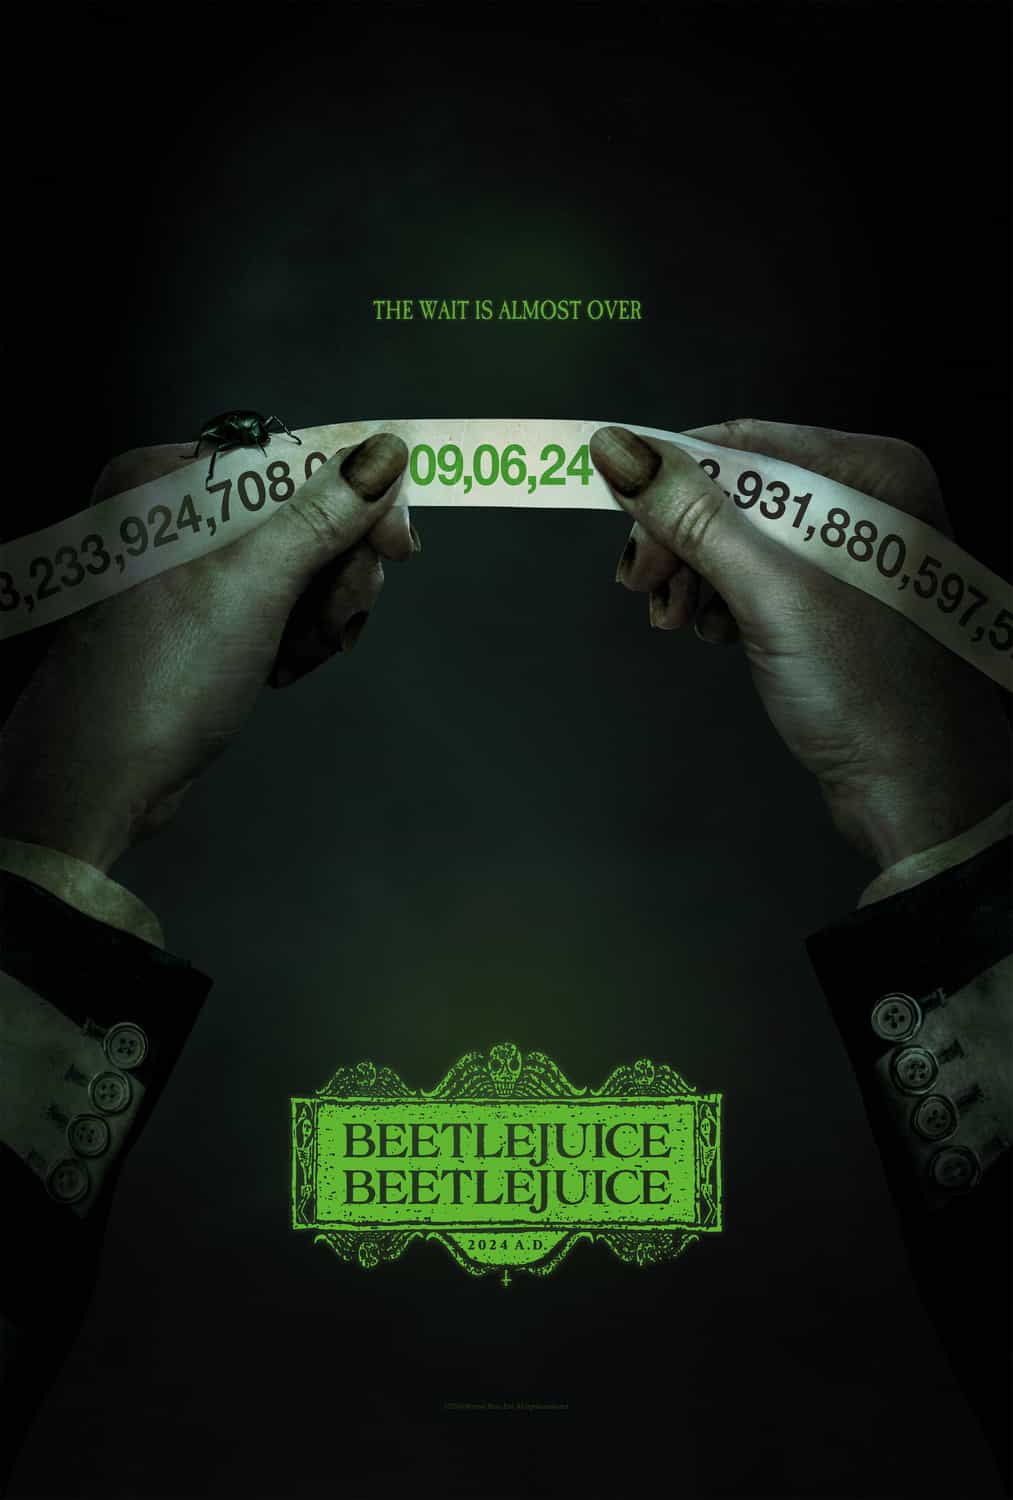 Check out the new trailer for upcoming movie Beetlejuice Beetlejuice which stars Michael Keaton and Jenna Ortega - movie UK release date 6th September 2024 #beetlejuicebeetlejuice